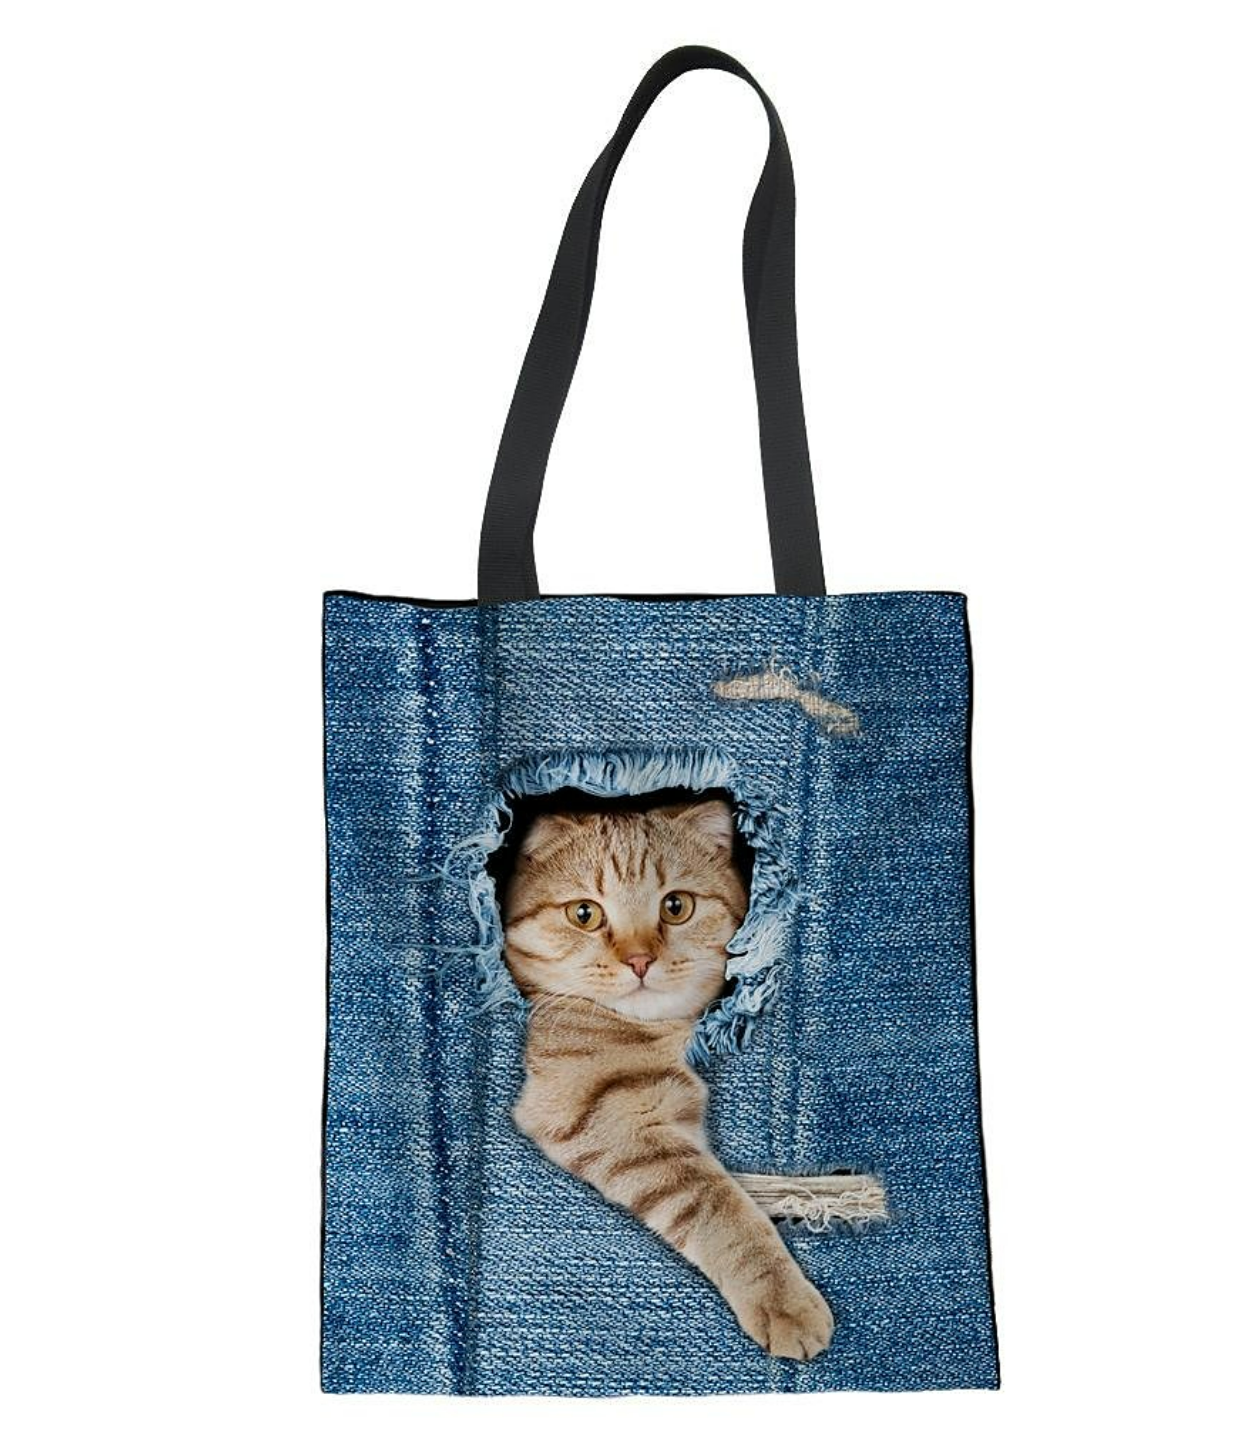 Women's Tote Shoulder Bag Canvas Tote Bag Polyester Shopping Holiday Print Large Capacity Foldable Lightweight Cat C3303Z22 CA4914Z22 CA4912Z22